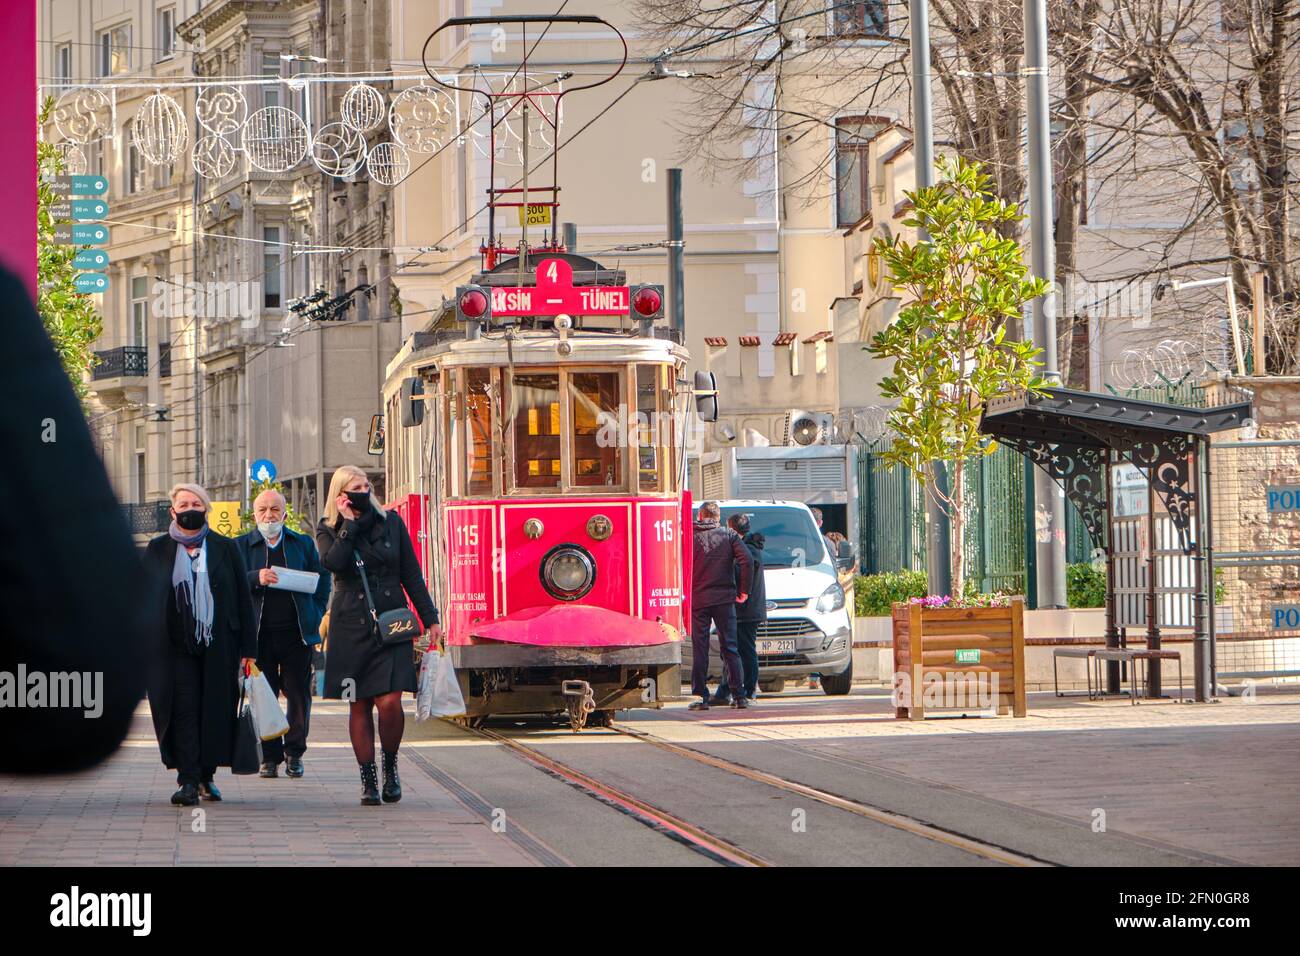 Most well known taksim square during morning with red, vintage and retro style tram in istiklal street and many tourists with medical masks. Stock Photo